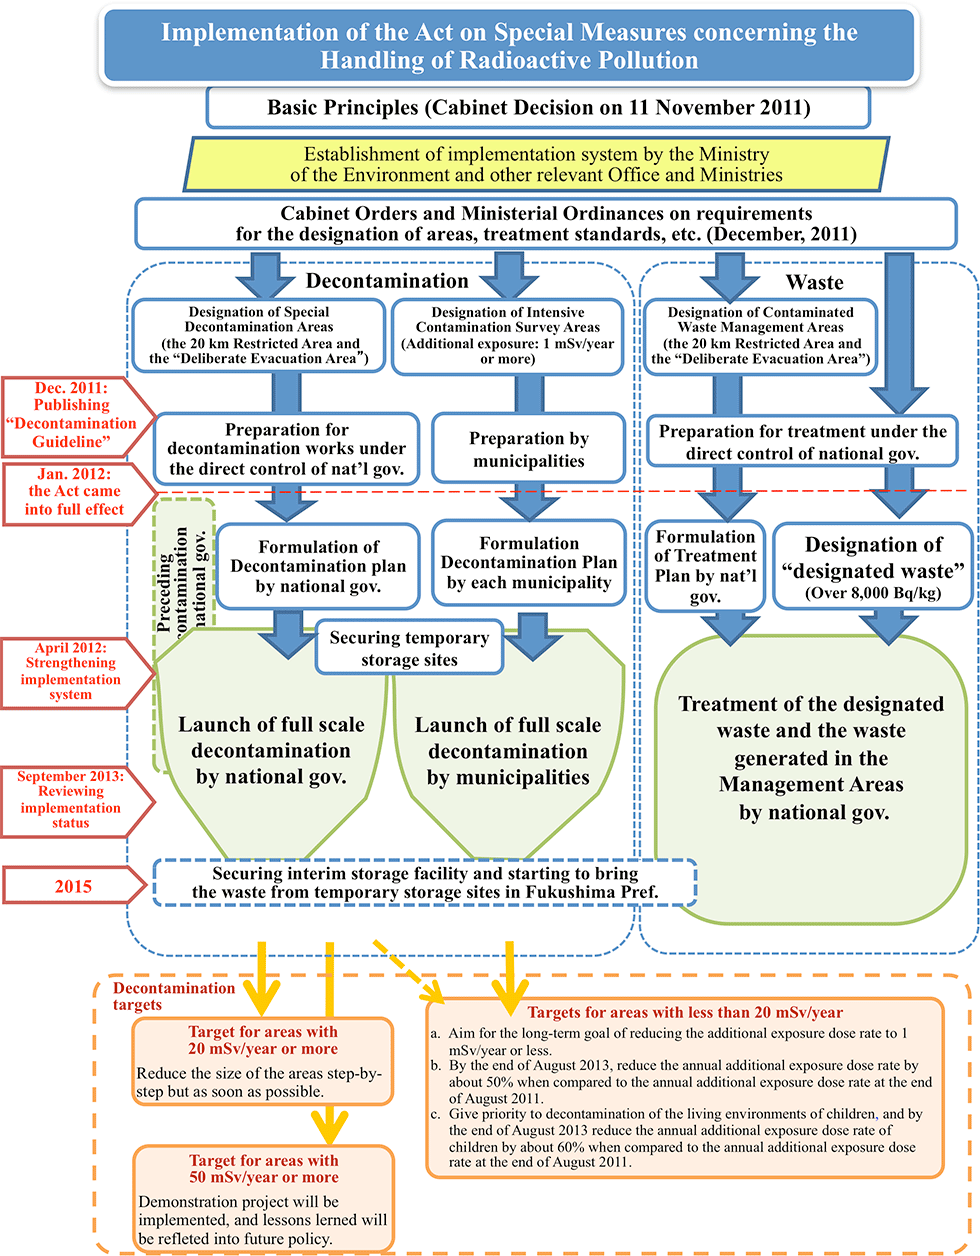 Outline of the Implementation of the Act on Special Measures: flowchart